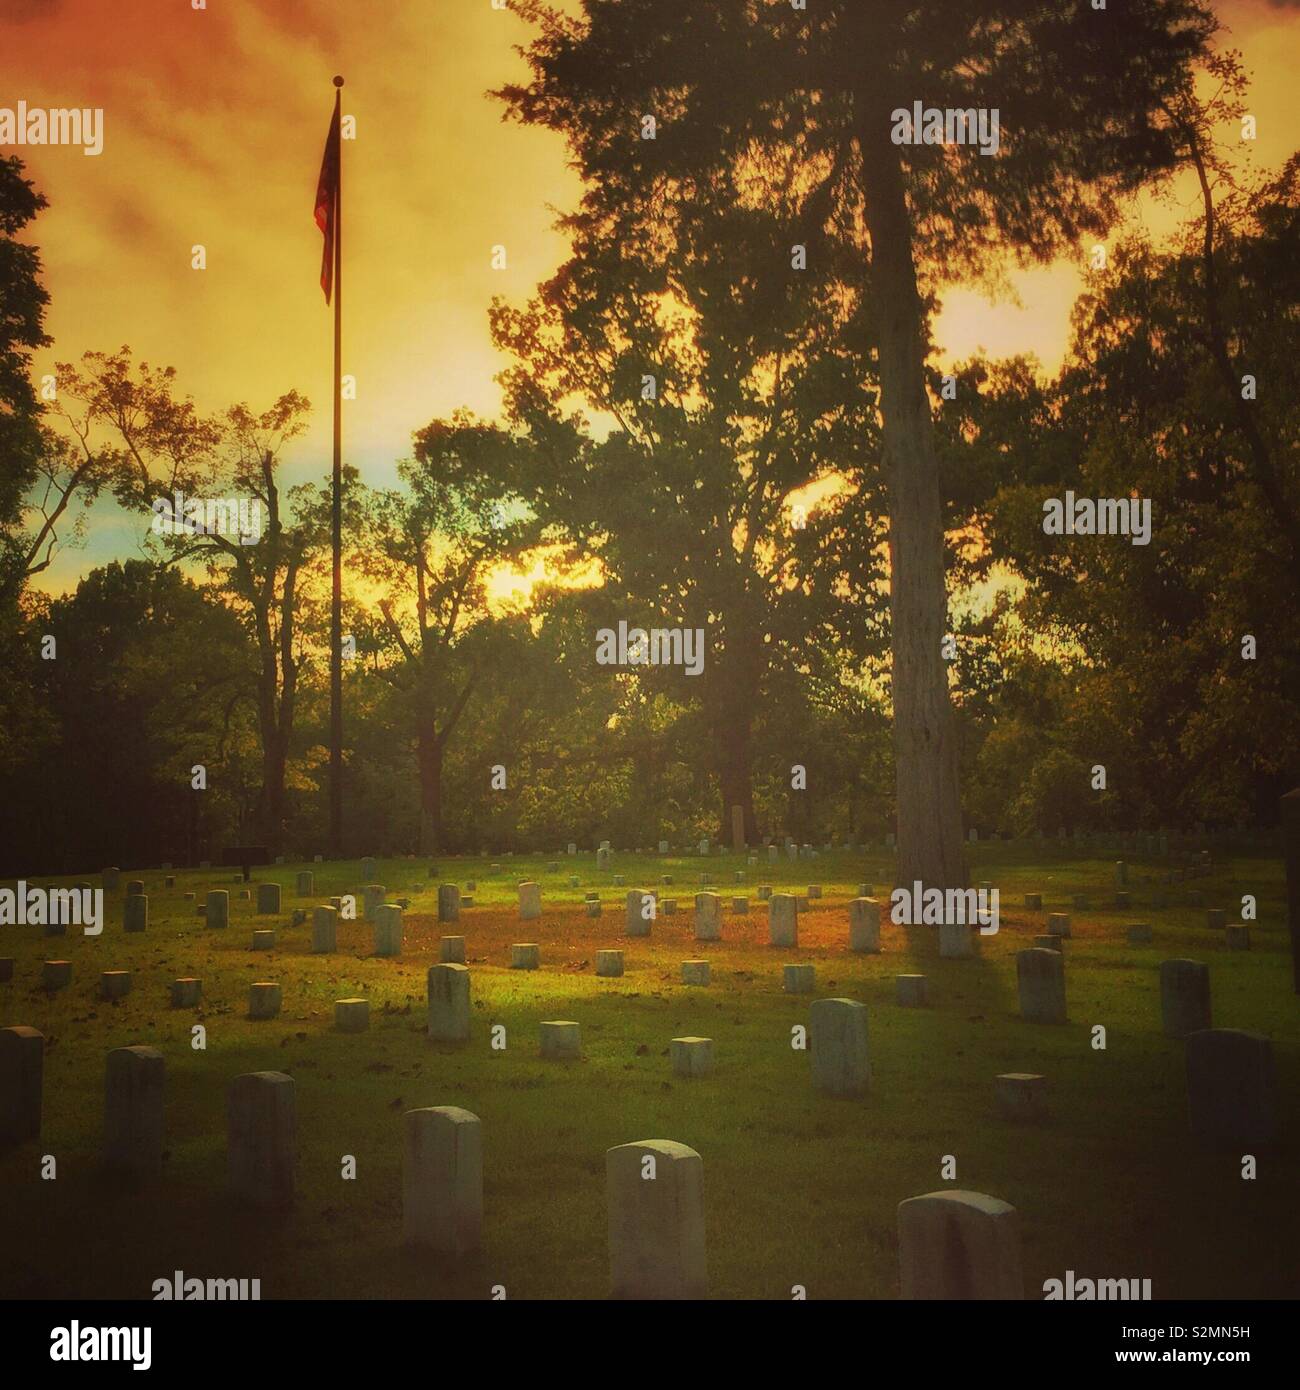 Shiloh National Cemetery is pictured at sunset at Shiloh National Military Park, Sept. 21, 2016, in Shiloh, Tennessee. The Battle of Shiloh, a major battle of the American Civil War, was held here. Stock Photo